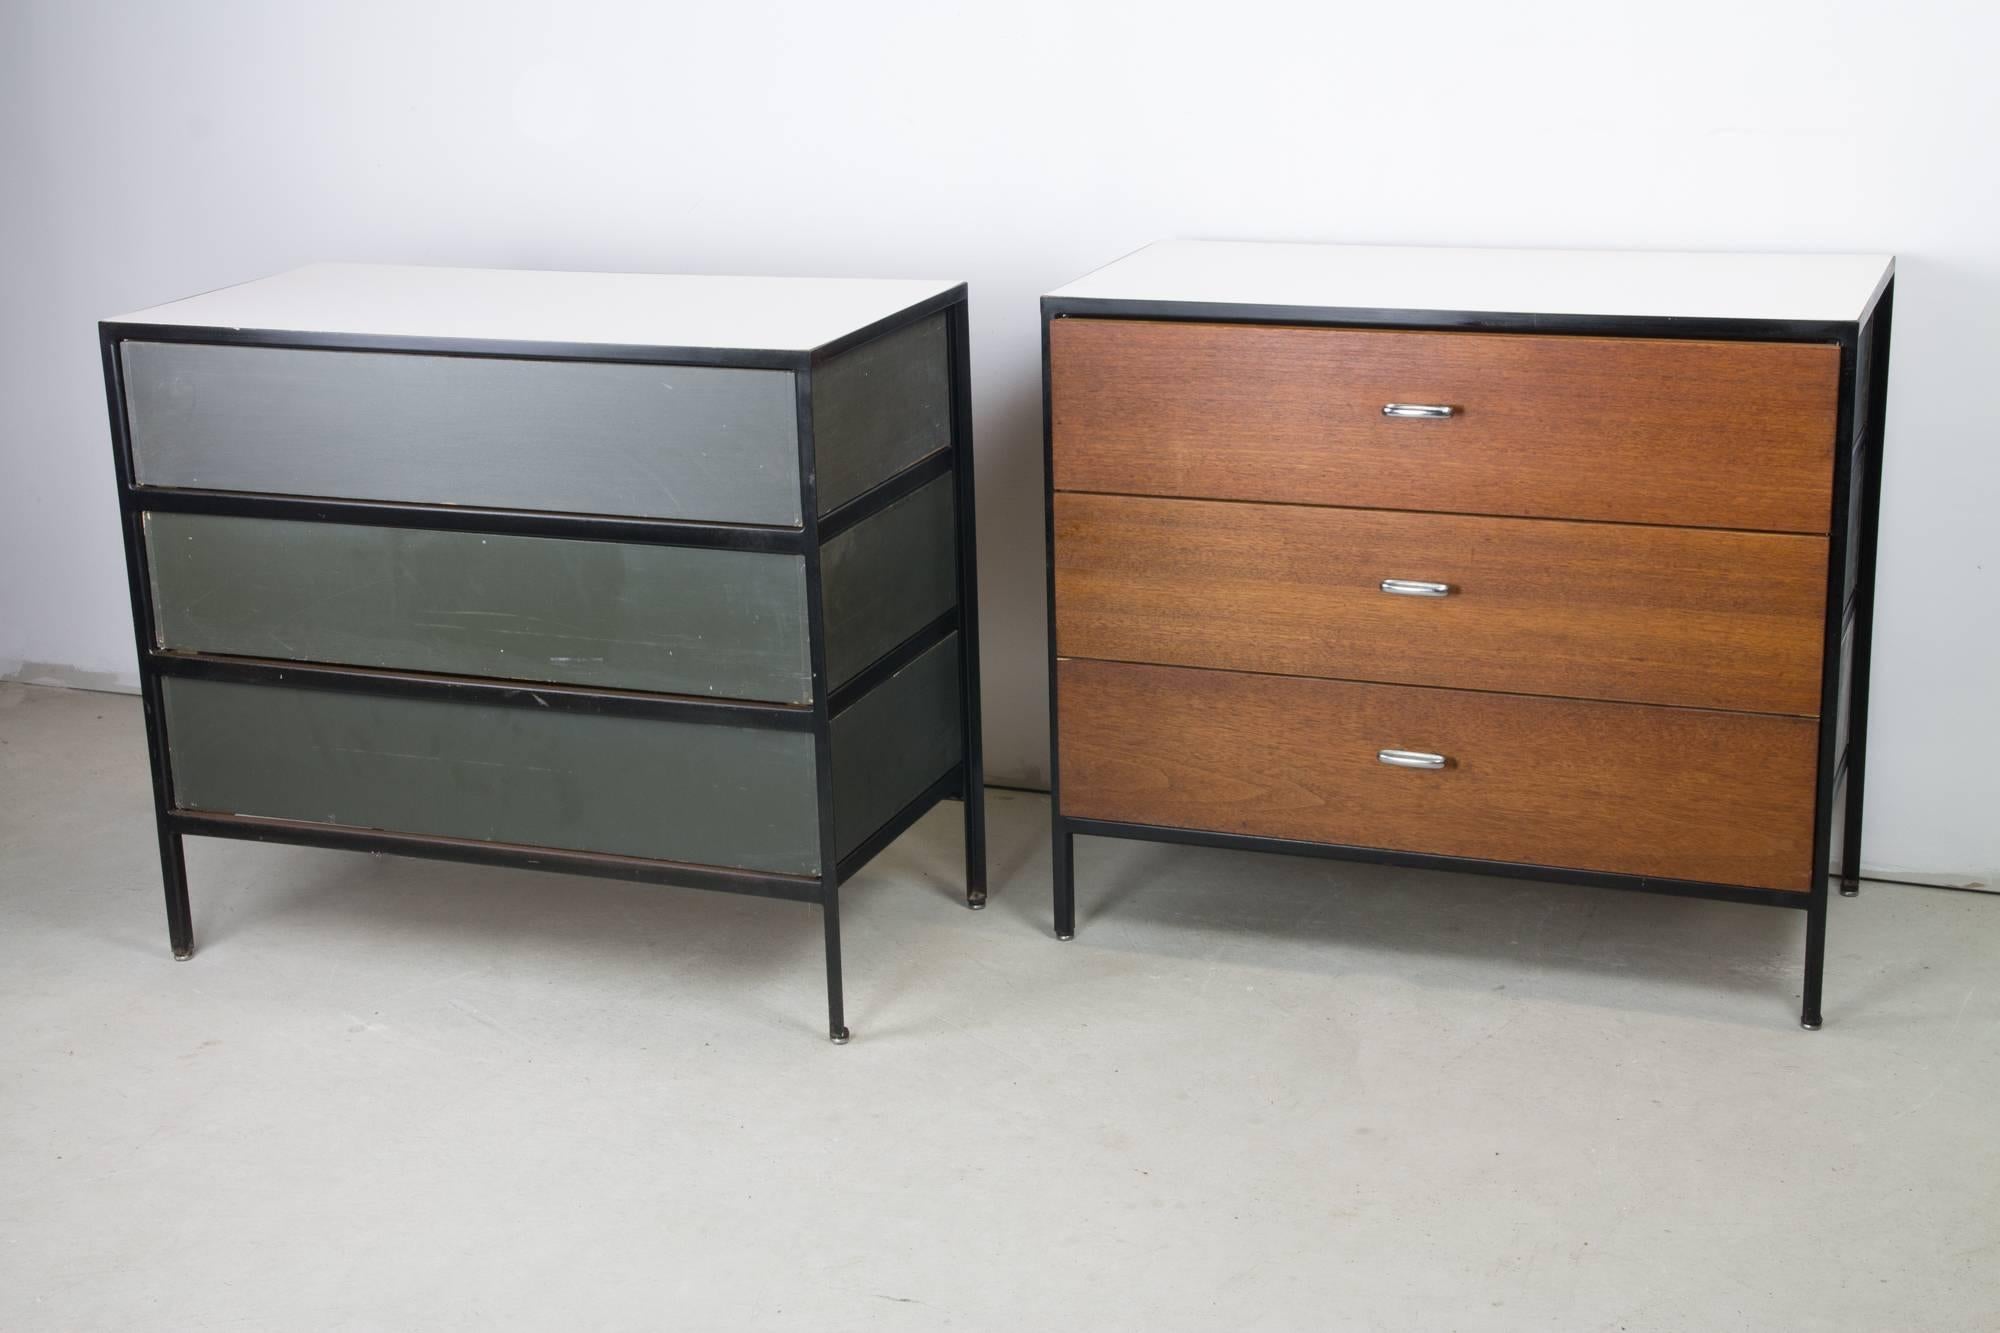 Pair of dressers by George Nelson as part of the Steel Frame line for Herman Miller. They feature external frames of blackened steel, three walnut front drawers, chromed pulls and white laminate tops.